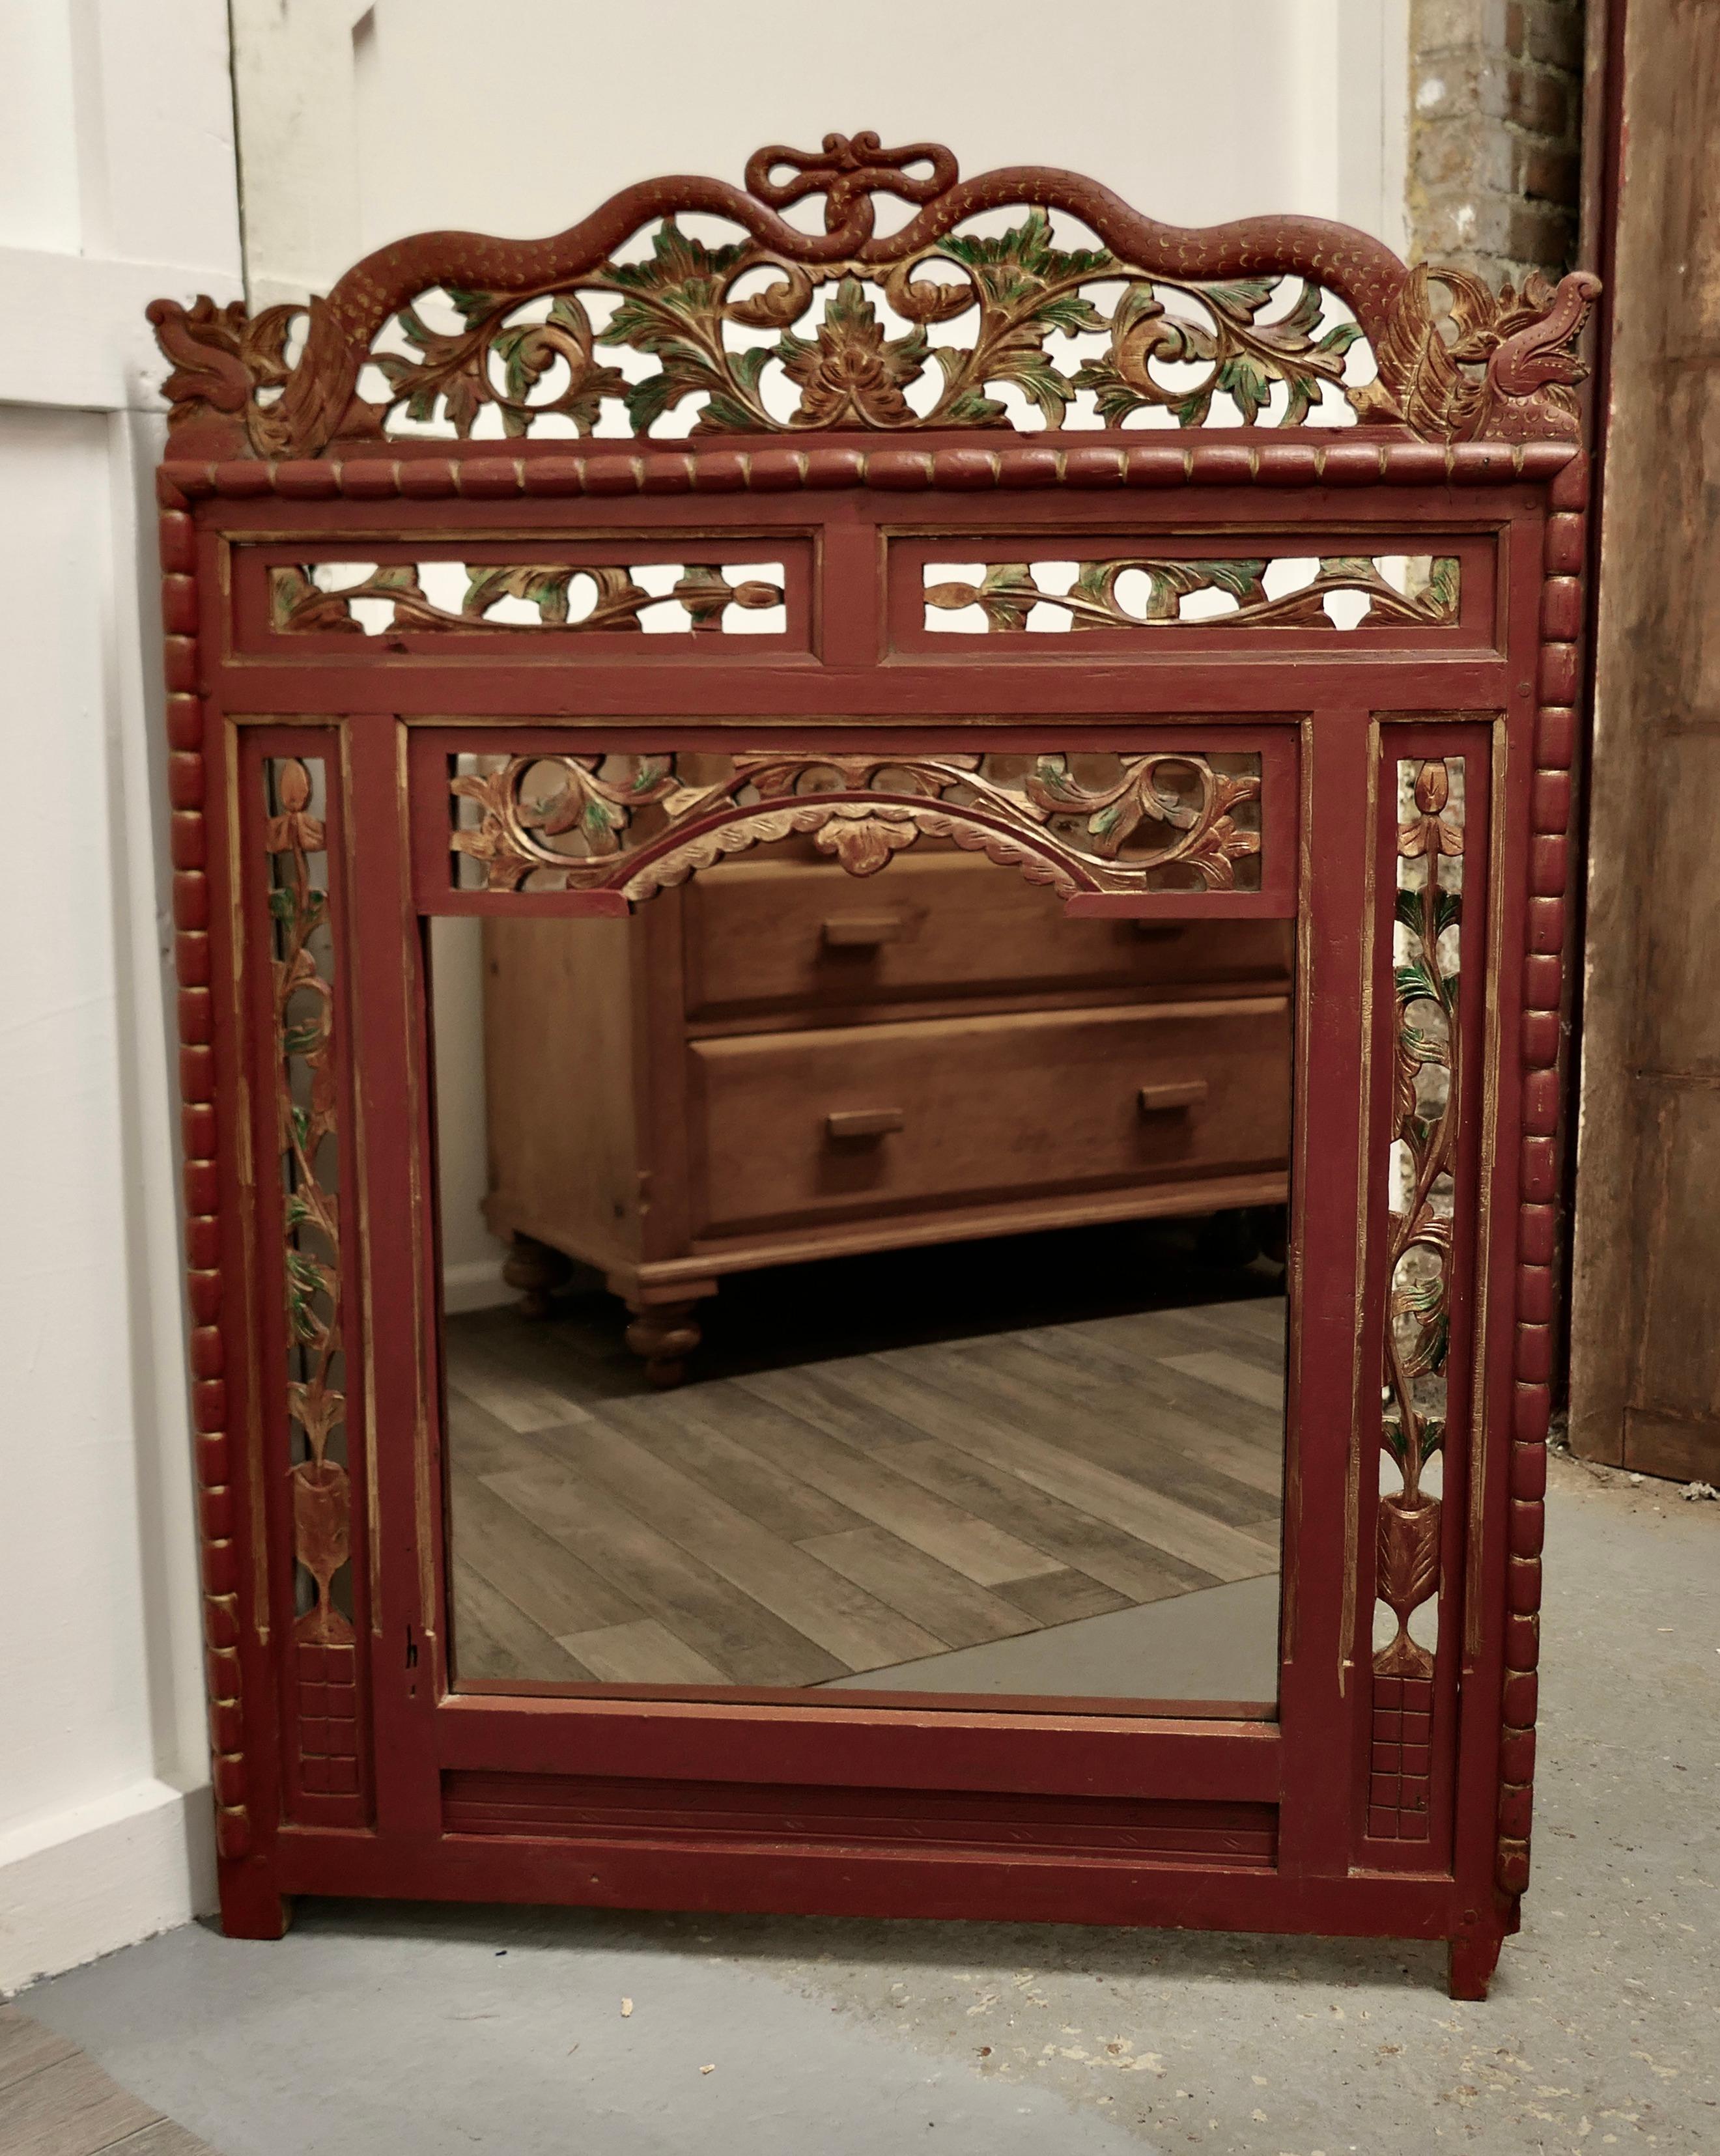 19th Century Oriental Painted Red Lacquer Mirror

This is a very attractive 19th Century Painted mirror Frame, it is painted mainly in Red Lacquer with carved and painted decoration
The top of the mirror has dragons with entwined tails and detailed